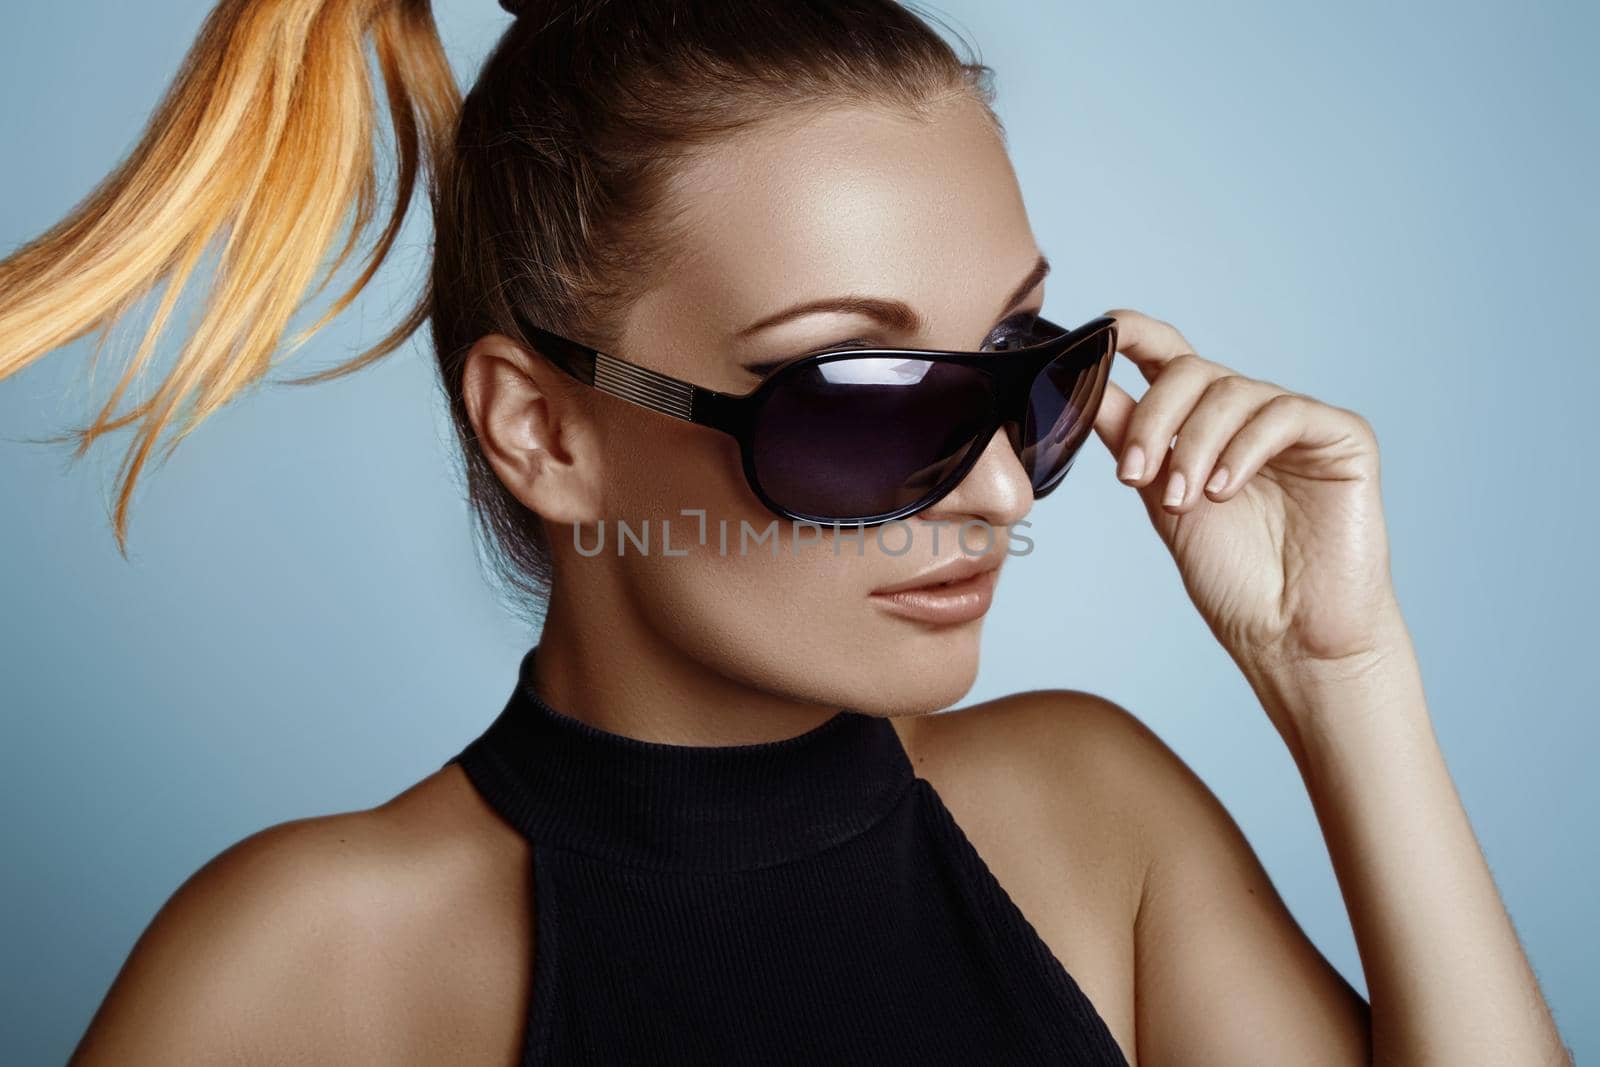 Beautiful young woman with black fashion sunglasses and glamour ponytail hairstyle on blue background. Trendy look for lady. Eye wear style.